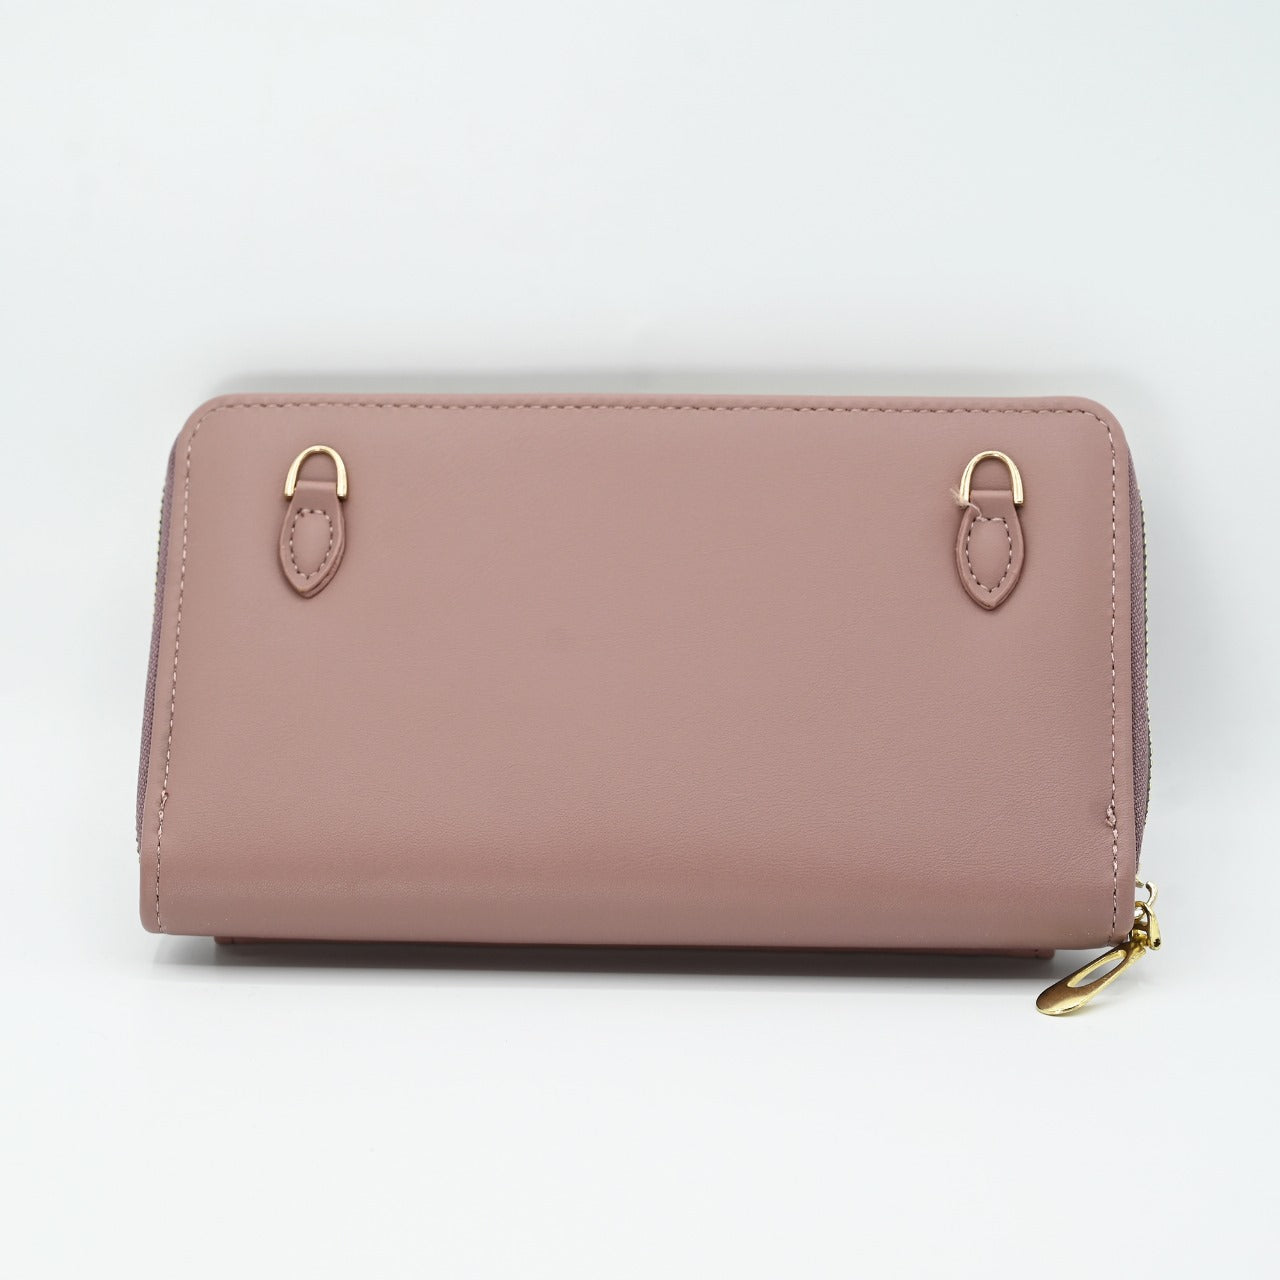 Imported Hand Wallet Hit Article in Tea Pink Colour Code 11